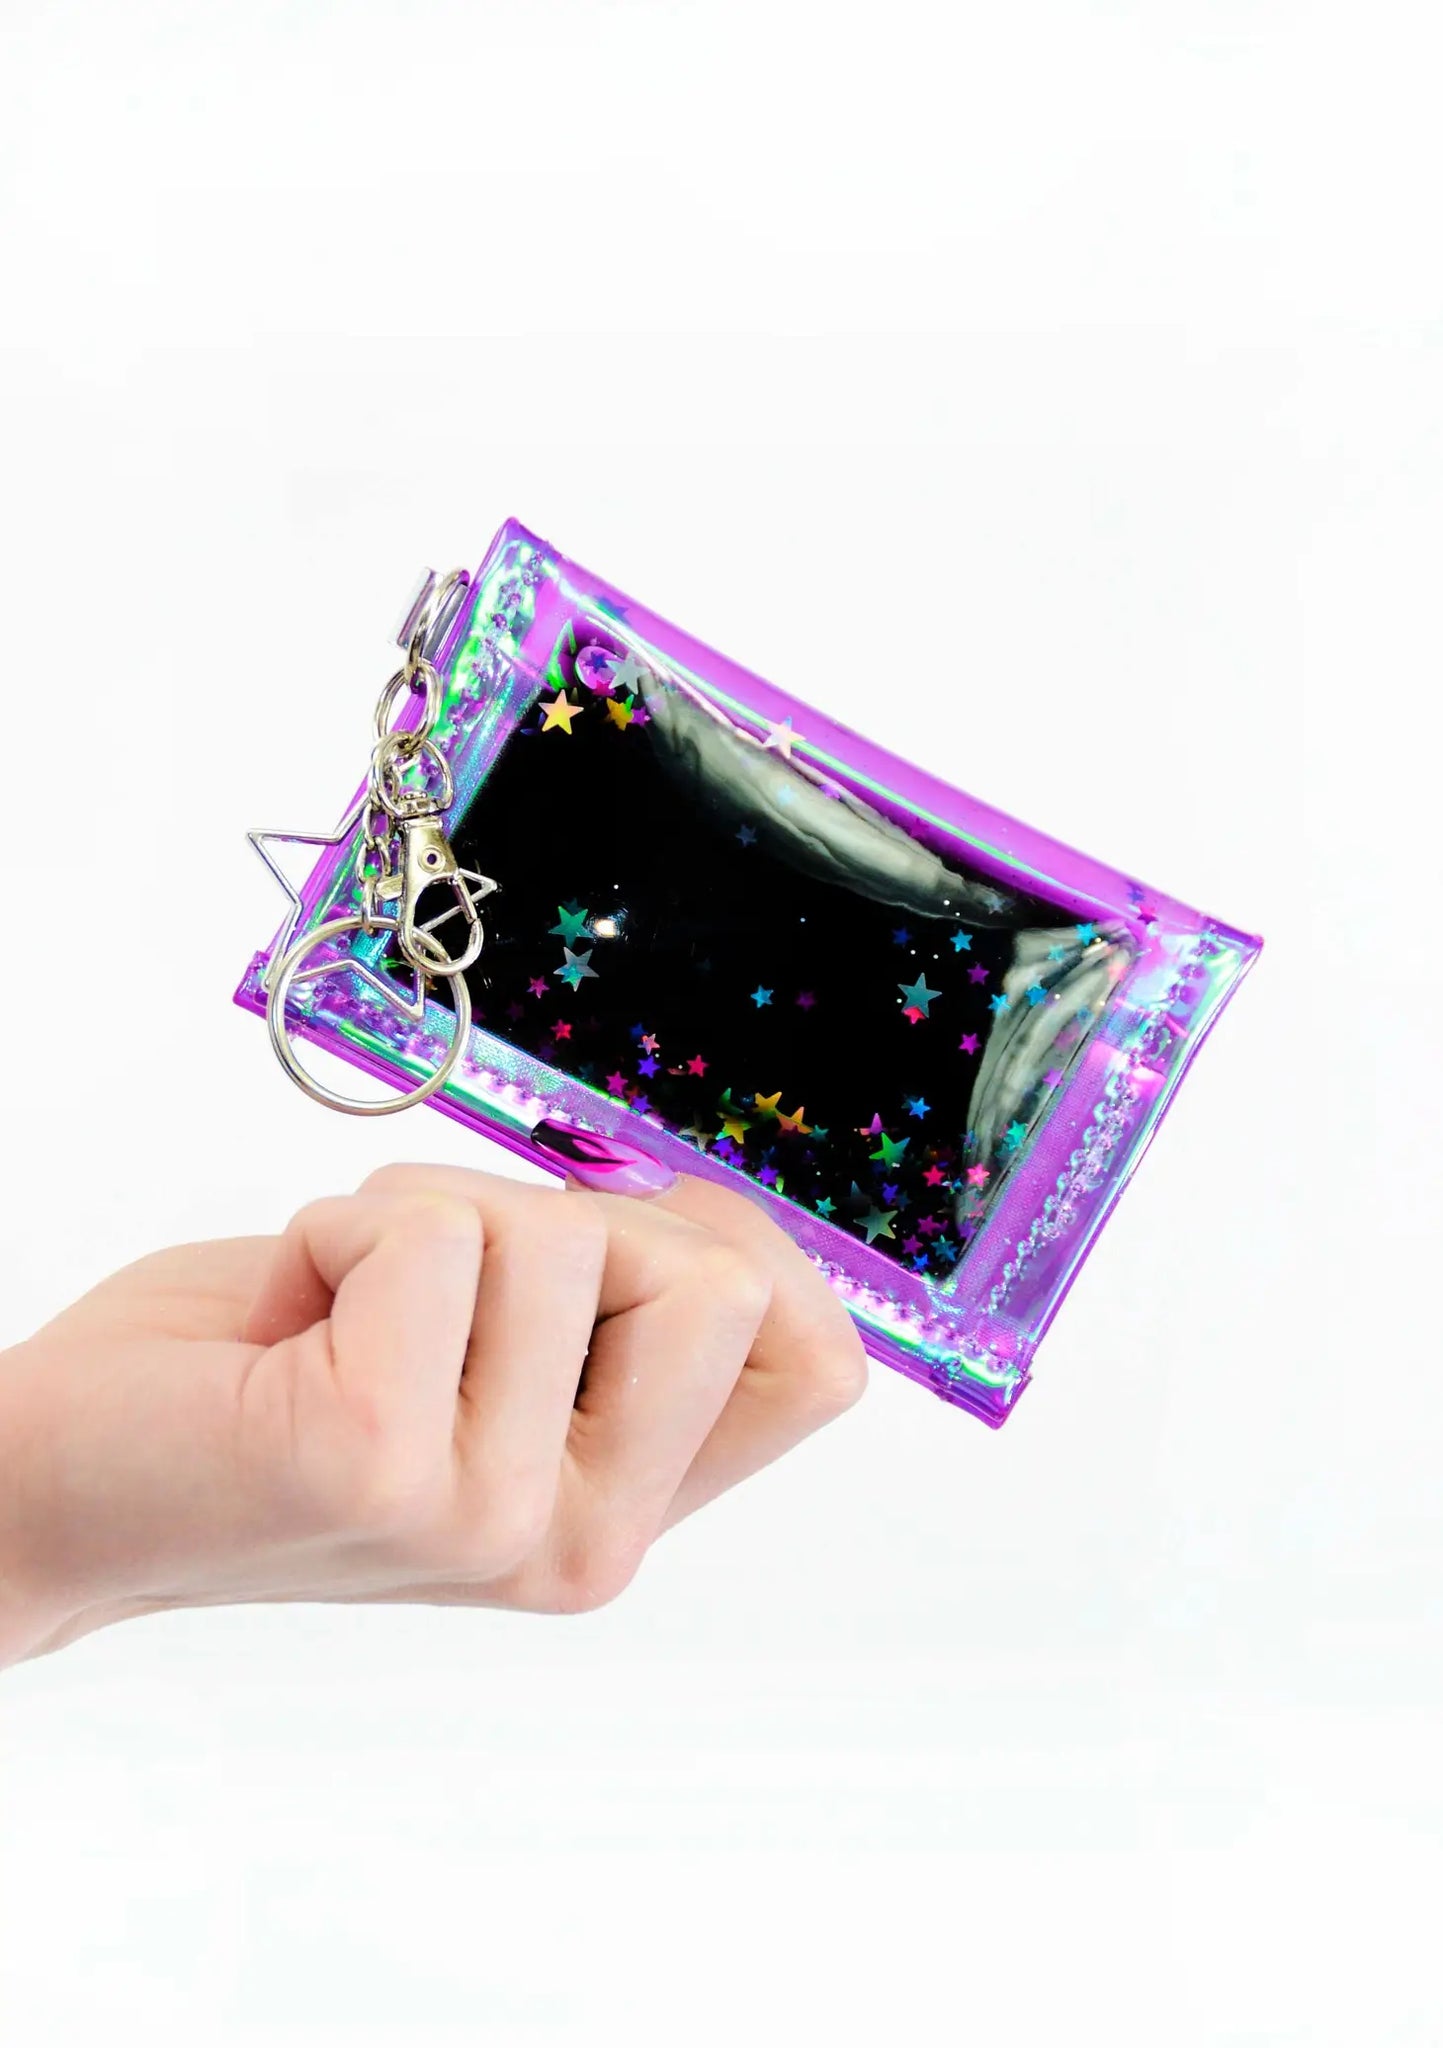 Rectangular wallet made of silver and iridescent purple vinyl filled with liquid glitter in purple, blue, black, and silver holographic star shaped glitter. It has a silver metal star shaped key ring. Shown held 